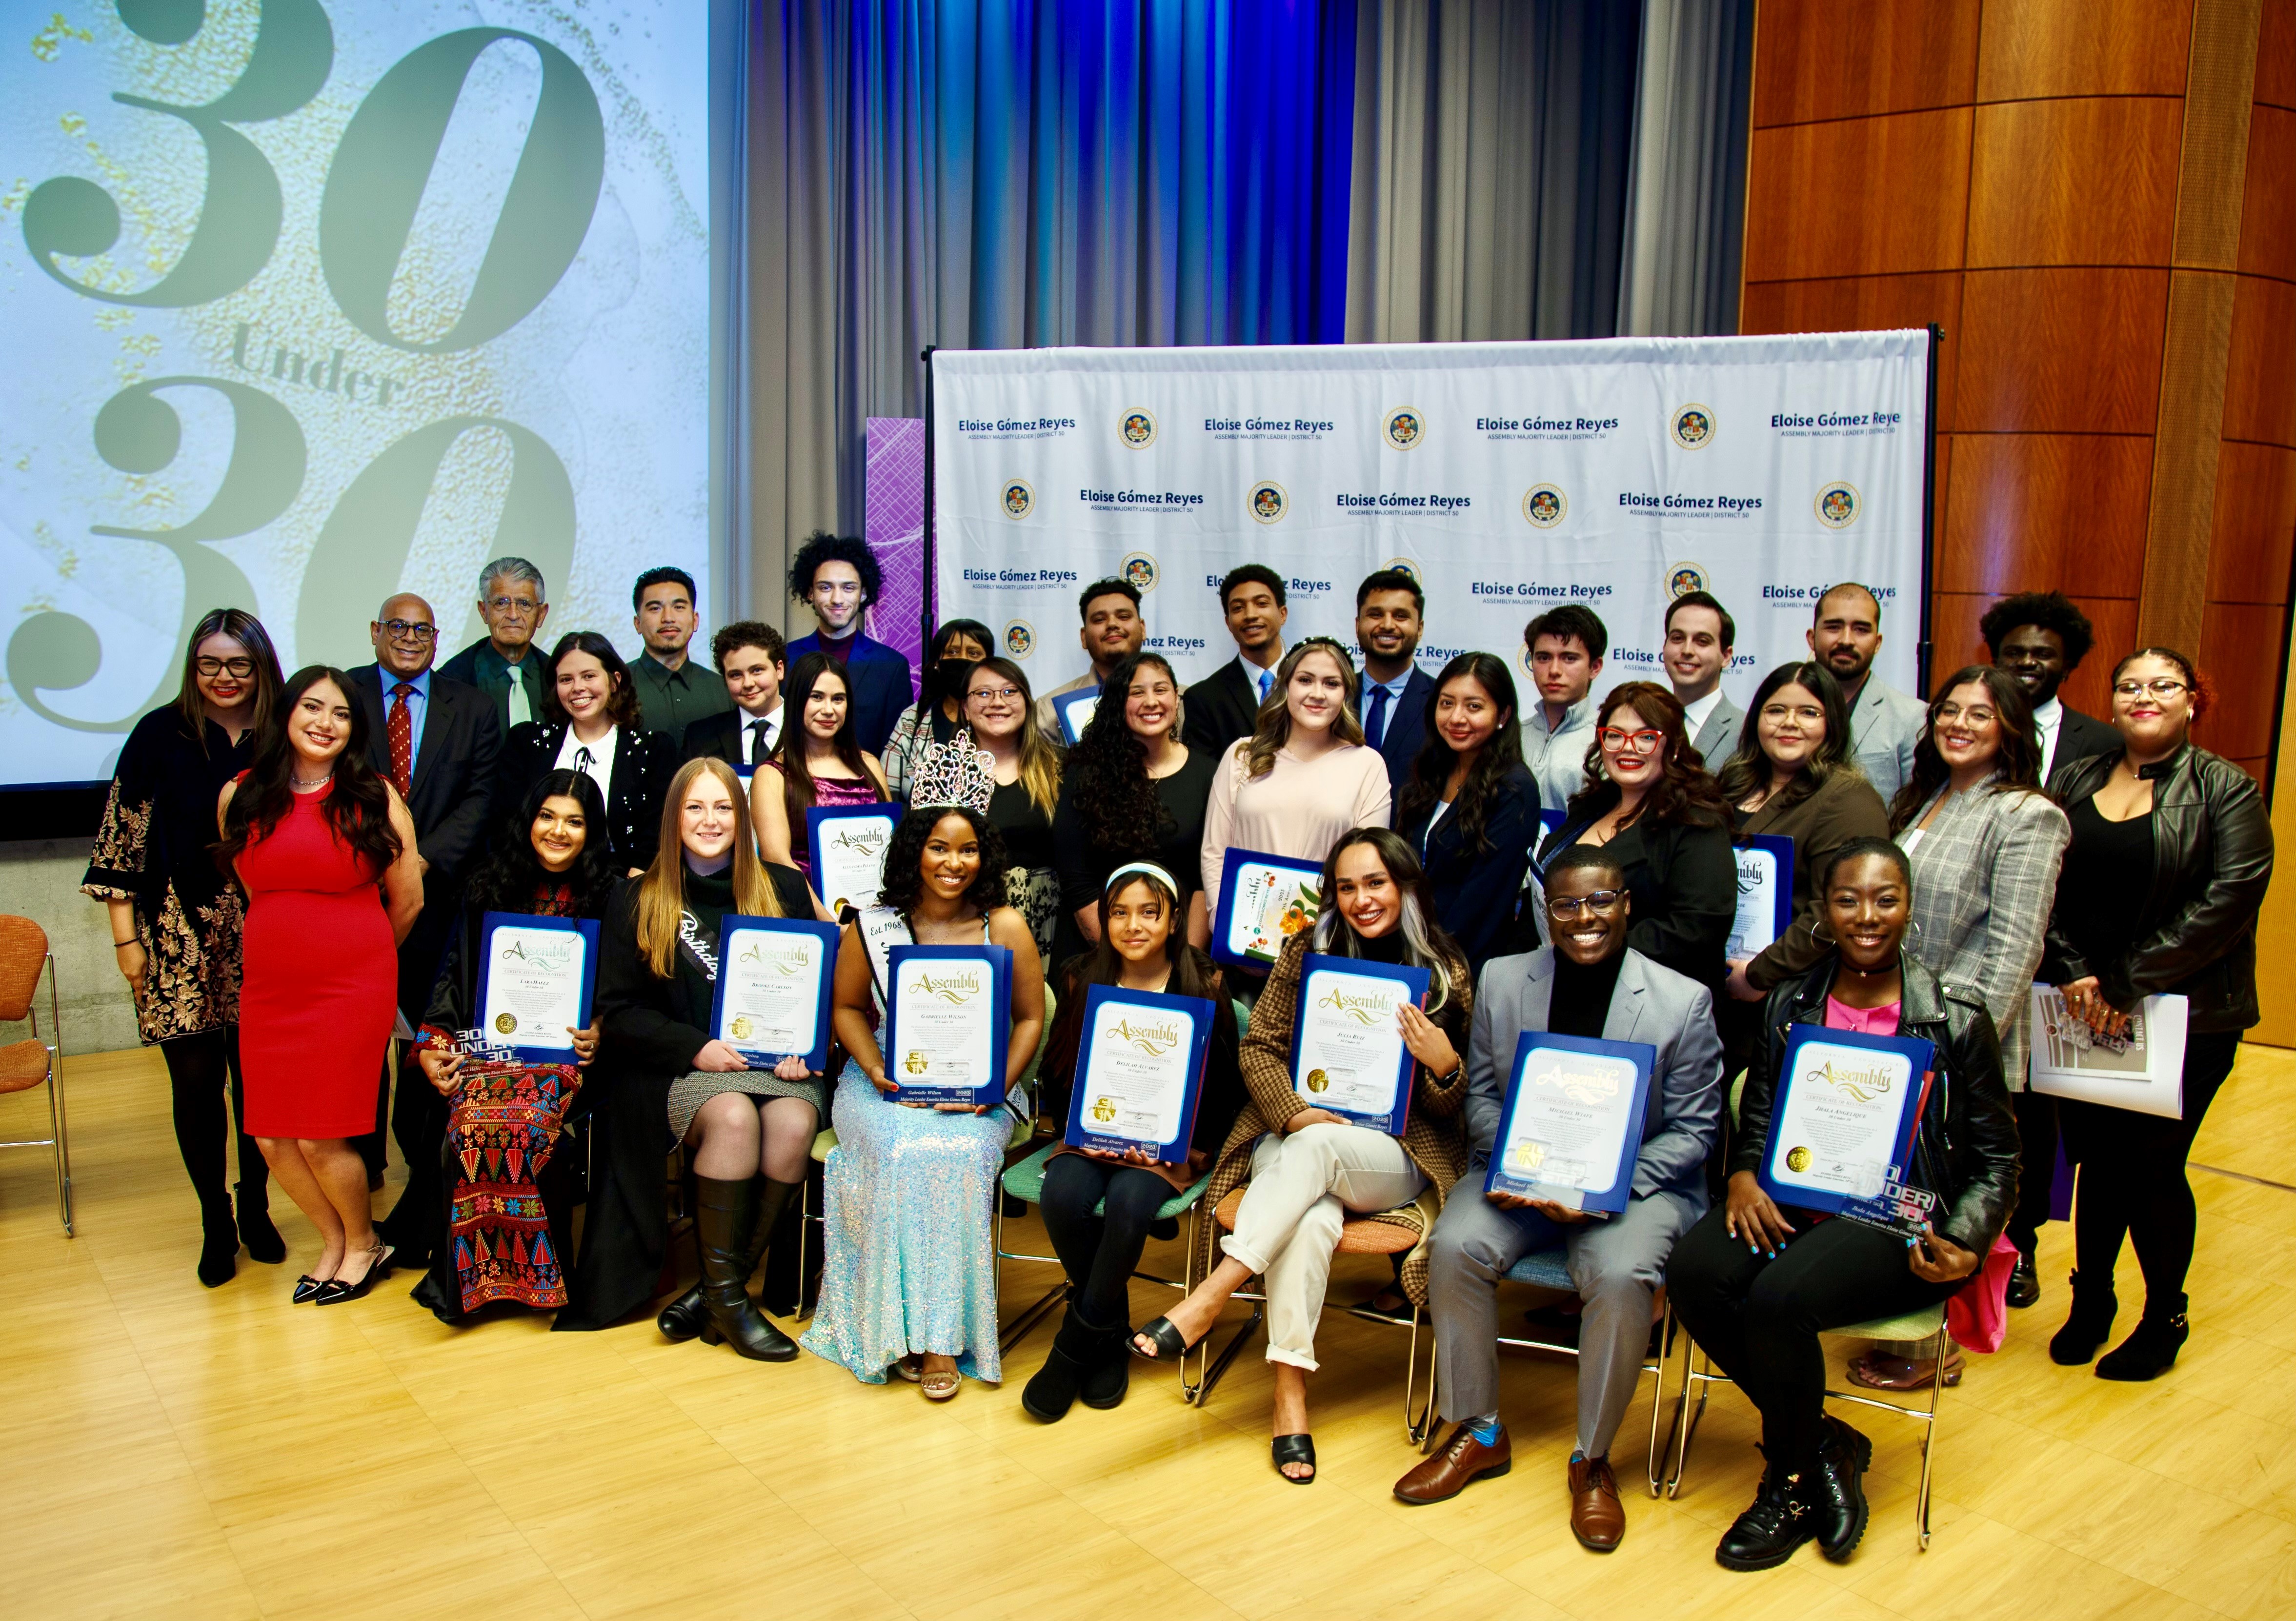 30 under 30 Honorees group photo